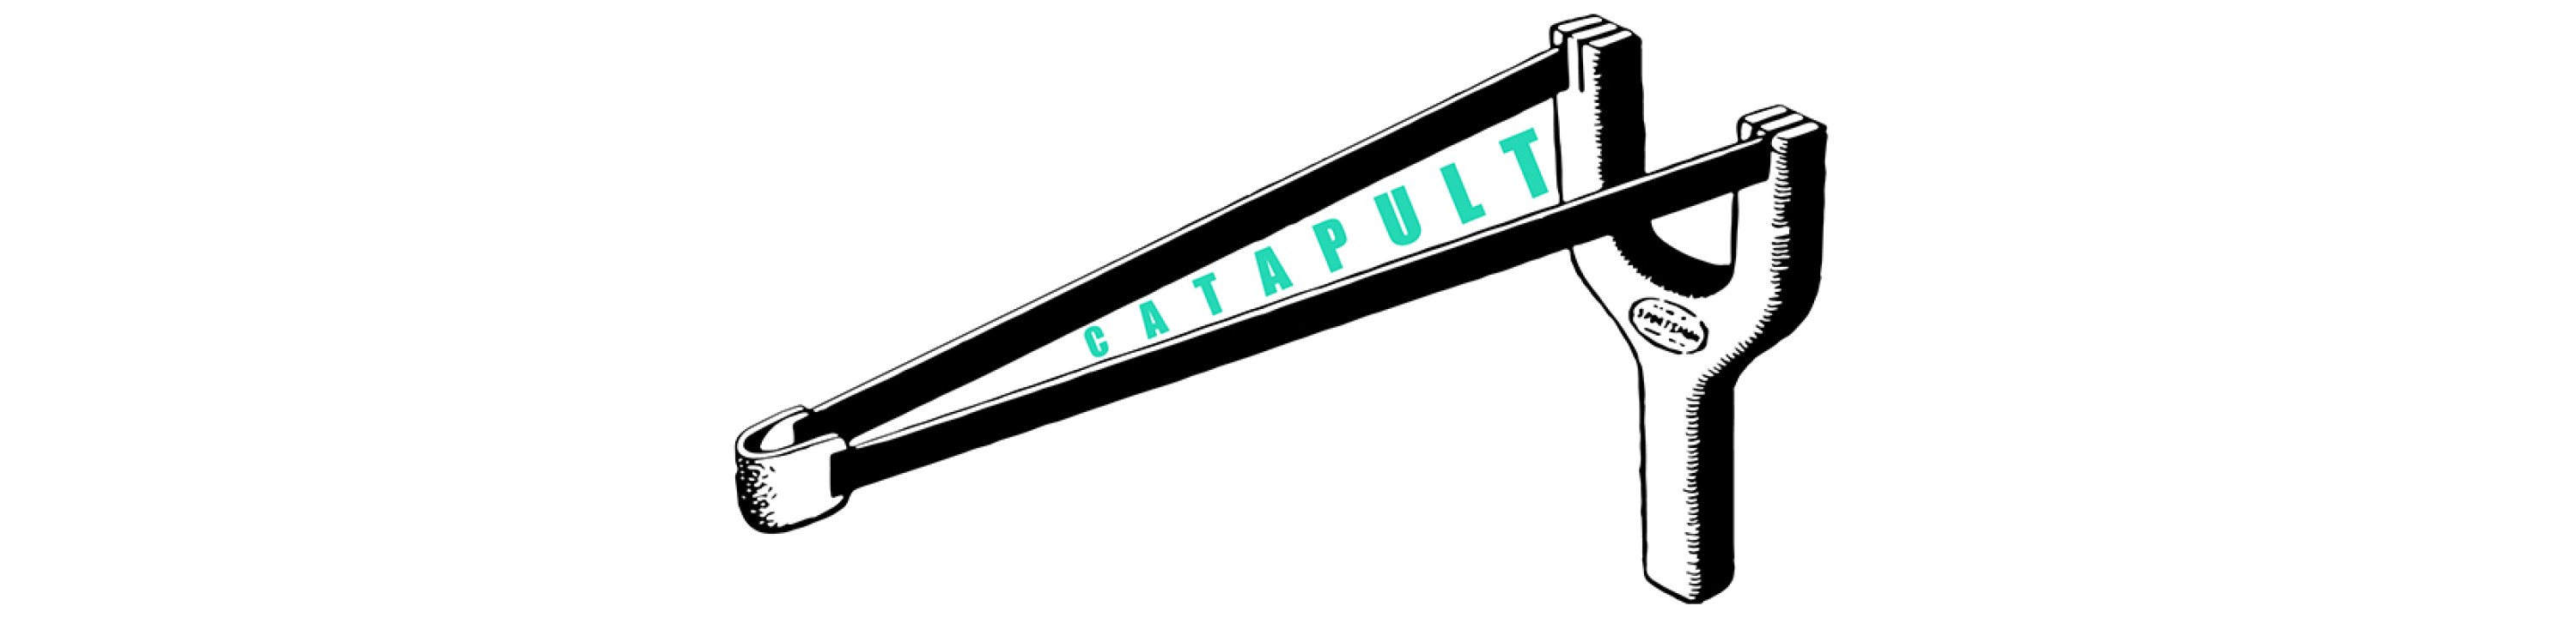 A black and white illustration of a vintage slingshot that looks like it's about to shoot out the word "CATAPULT" in teal letters